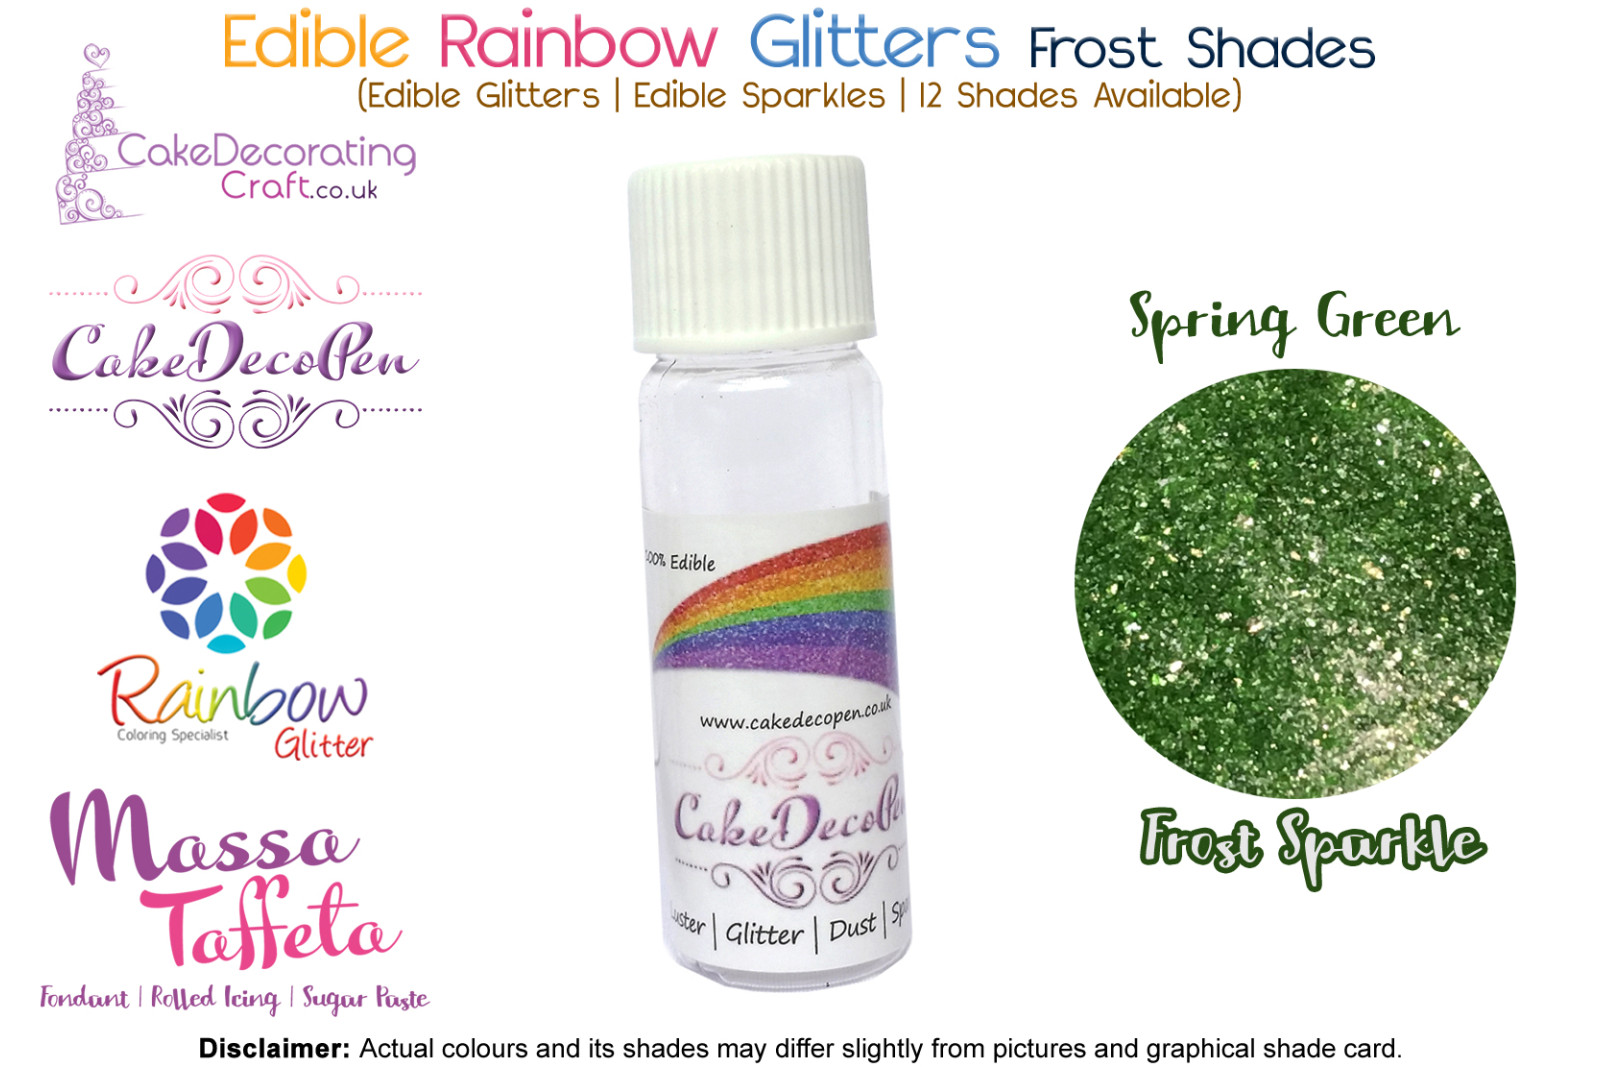 Spring Green | Rainbow Glitter | Frost Shade | 100 % Edible | Cake Decorating Craft | 8 Grams